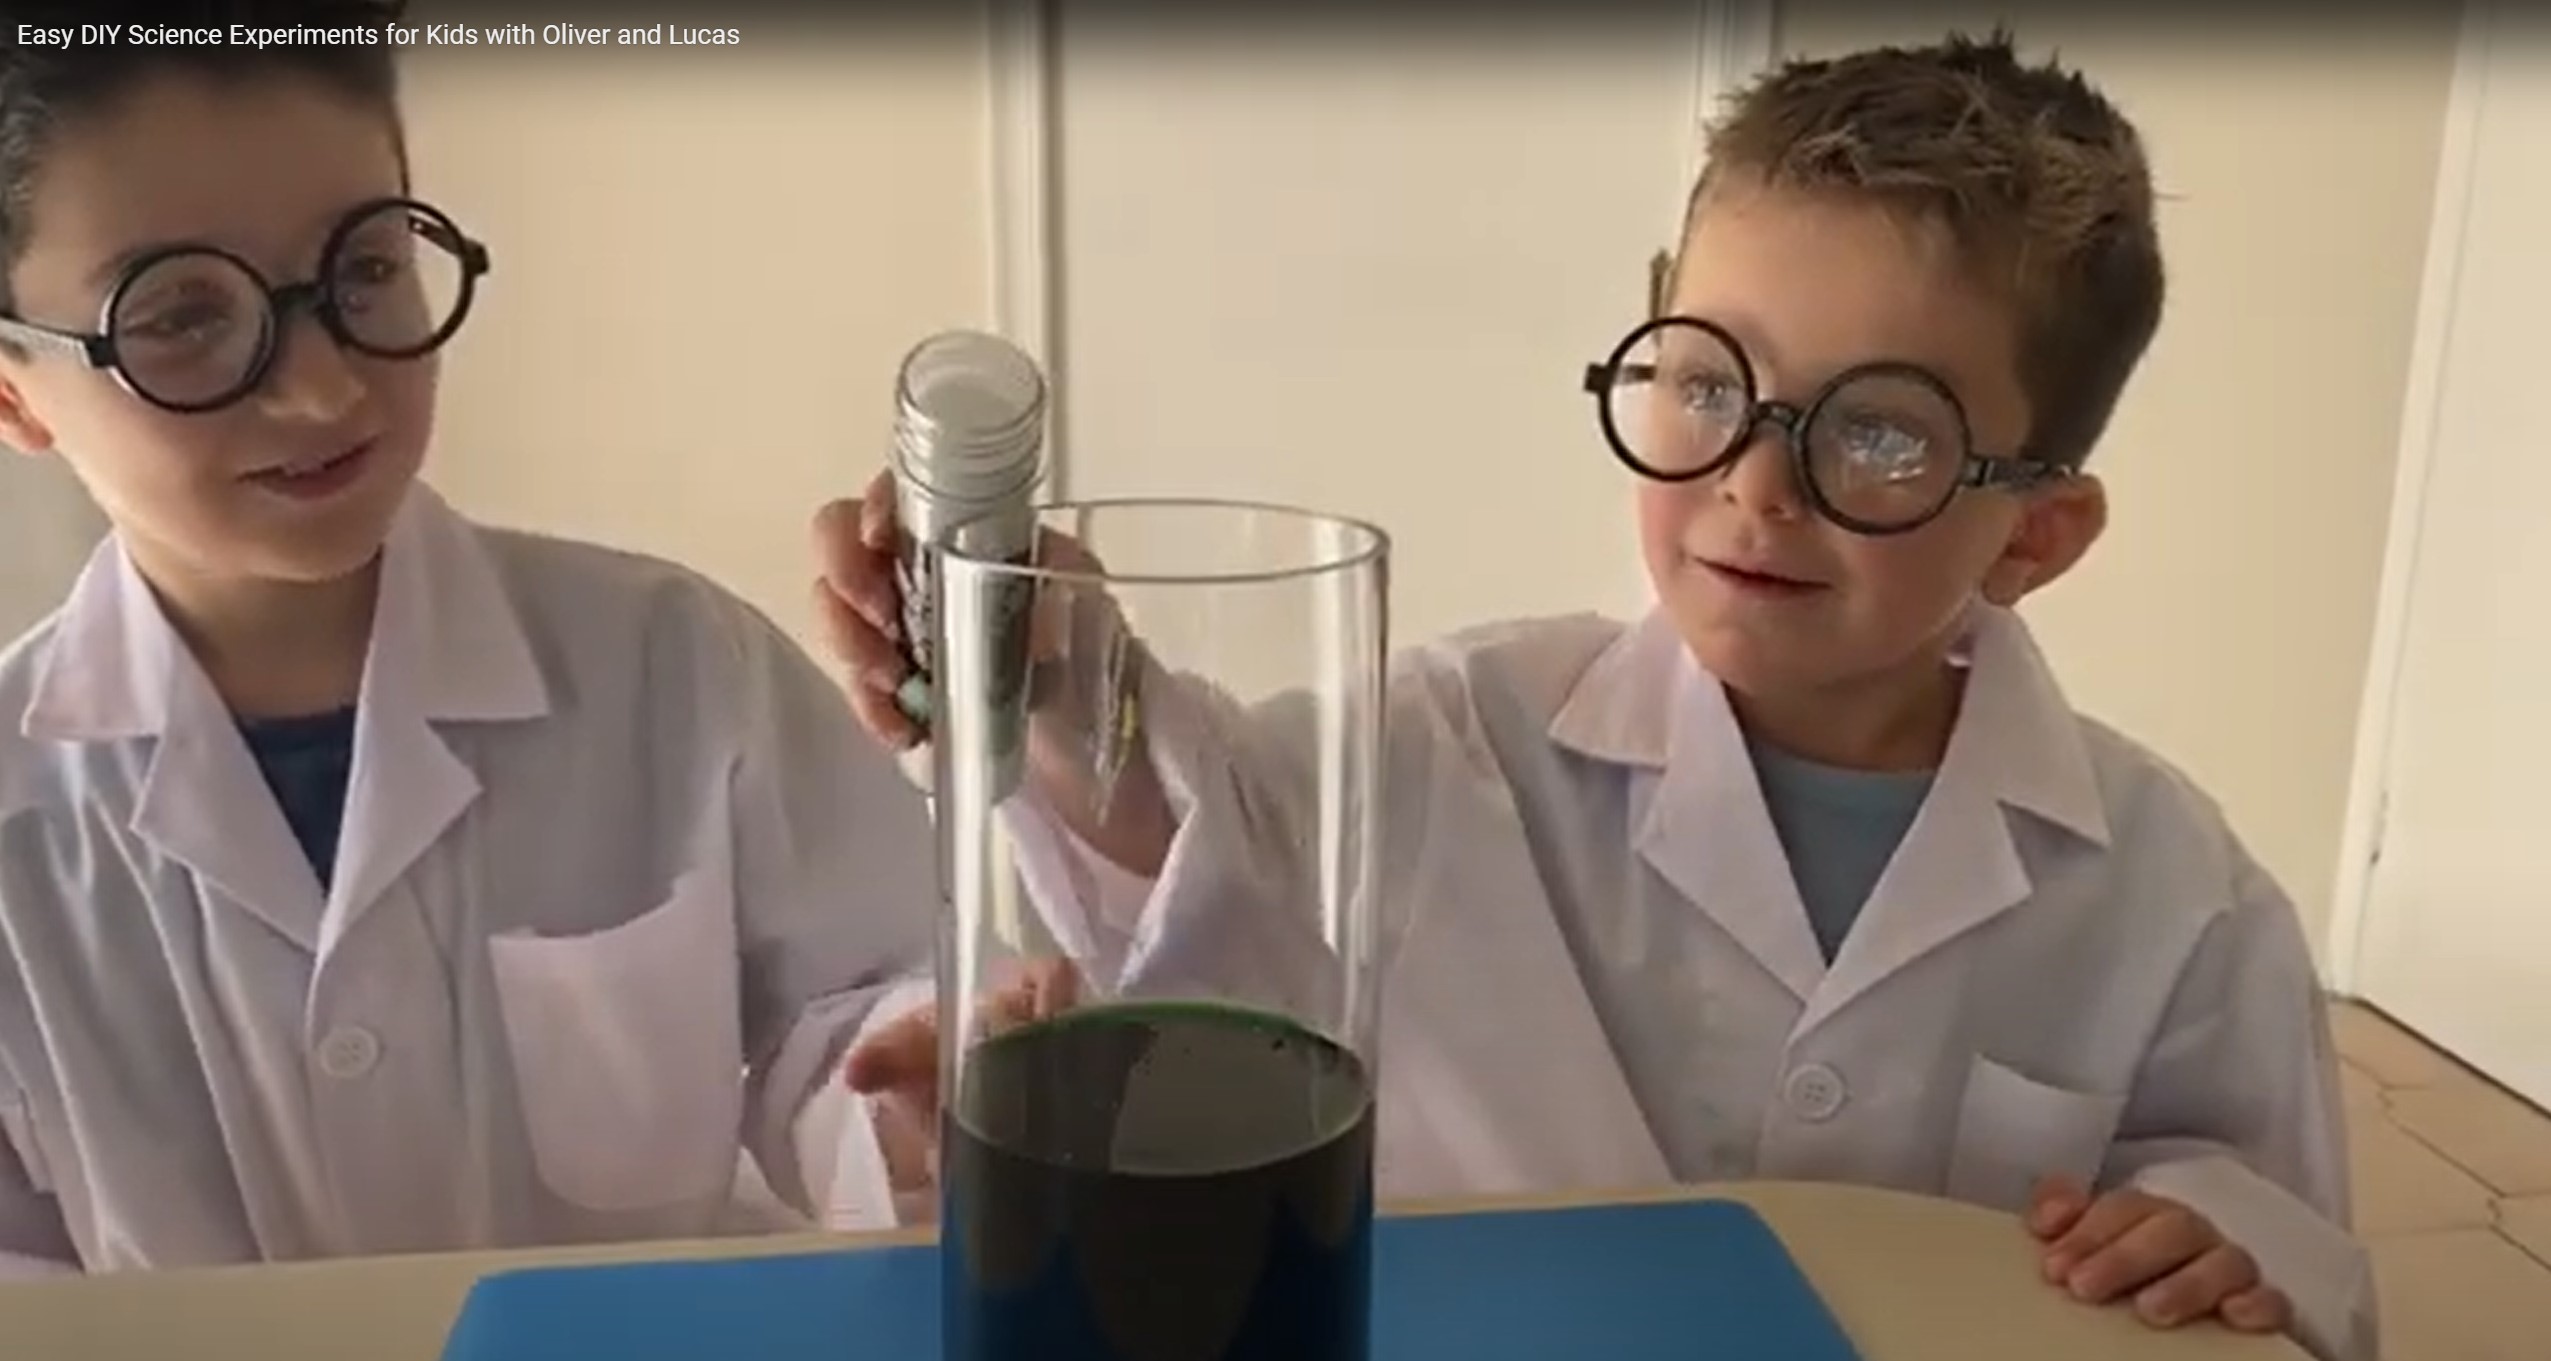 Two brothers, Oliver and Lucas, in white lab coats pouring liquid into a beaker